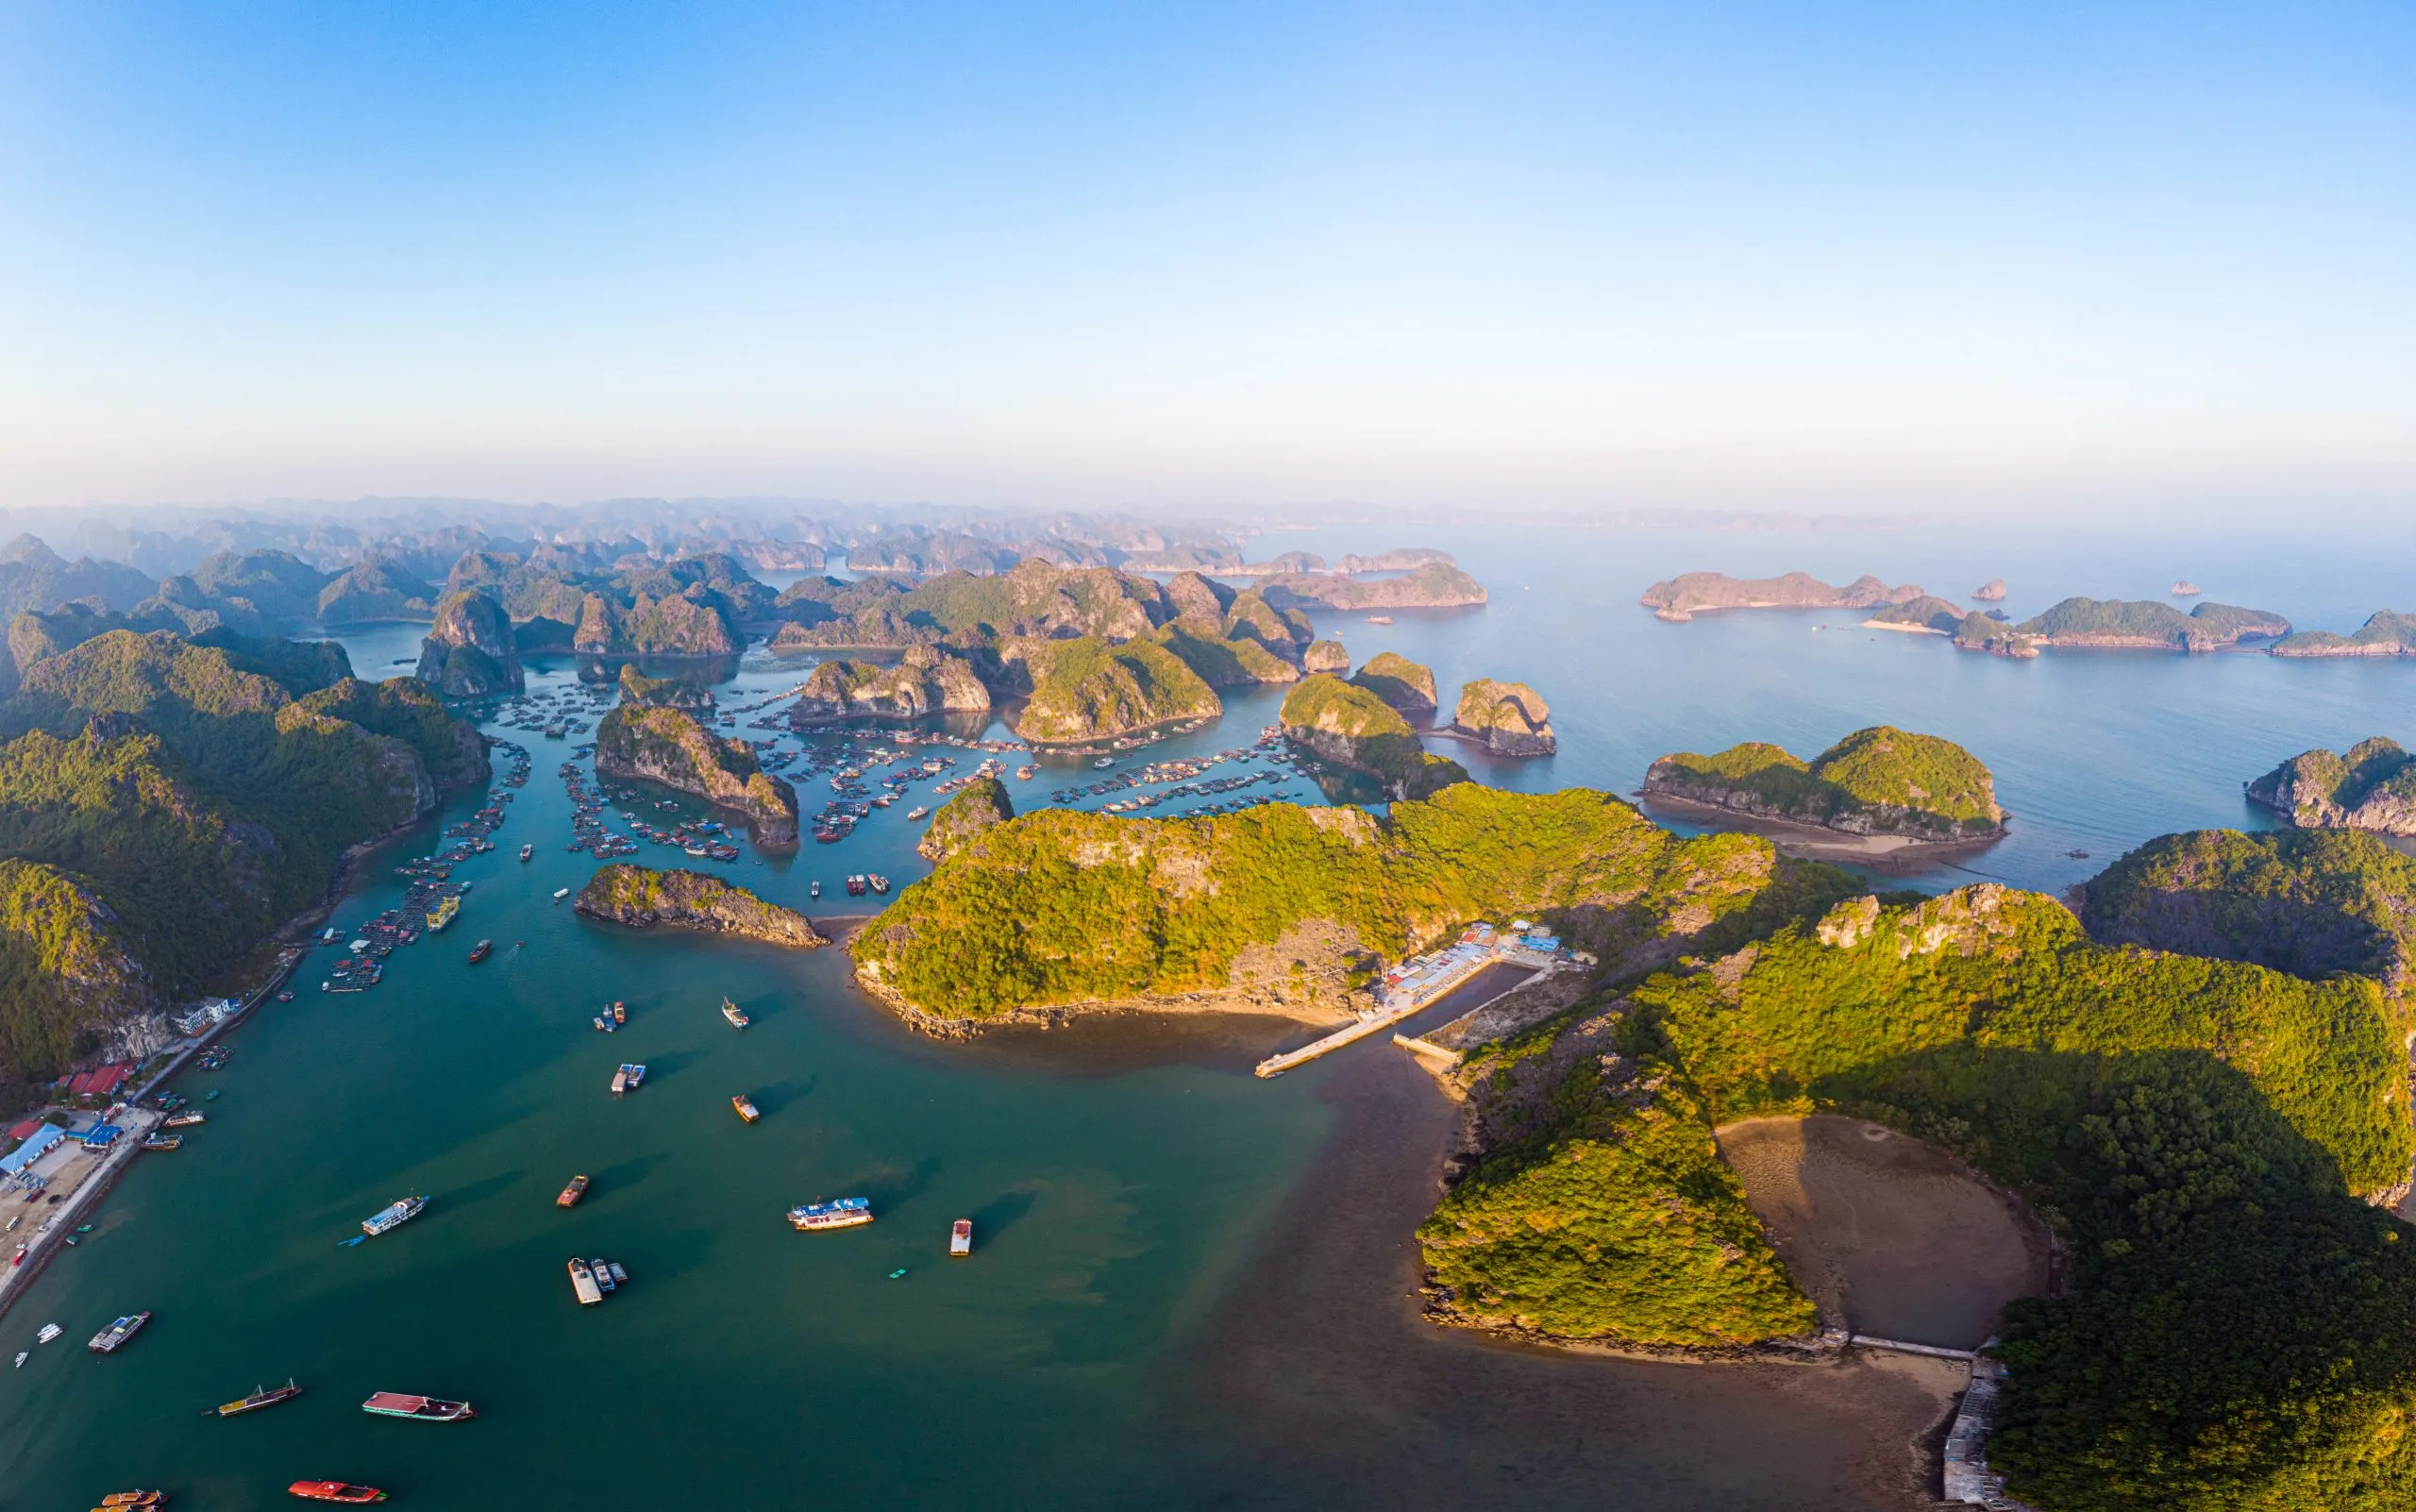 Aerial sunset view of Lan Ha bay and Cat Ba island, Vietnam, unique limestone rock islands and karst formation peaks in the sea, floating fishermen villages and fish farms from above.